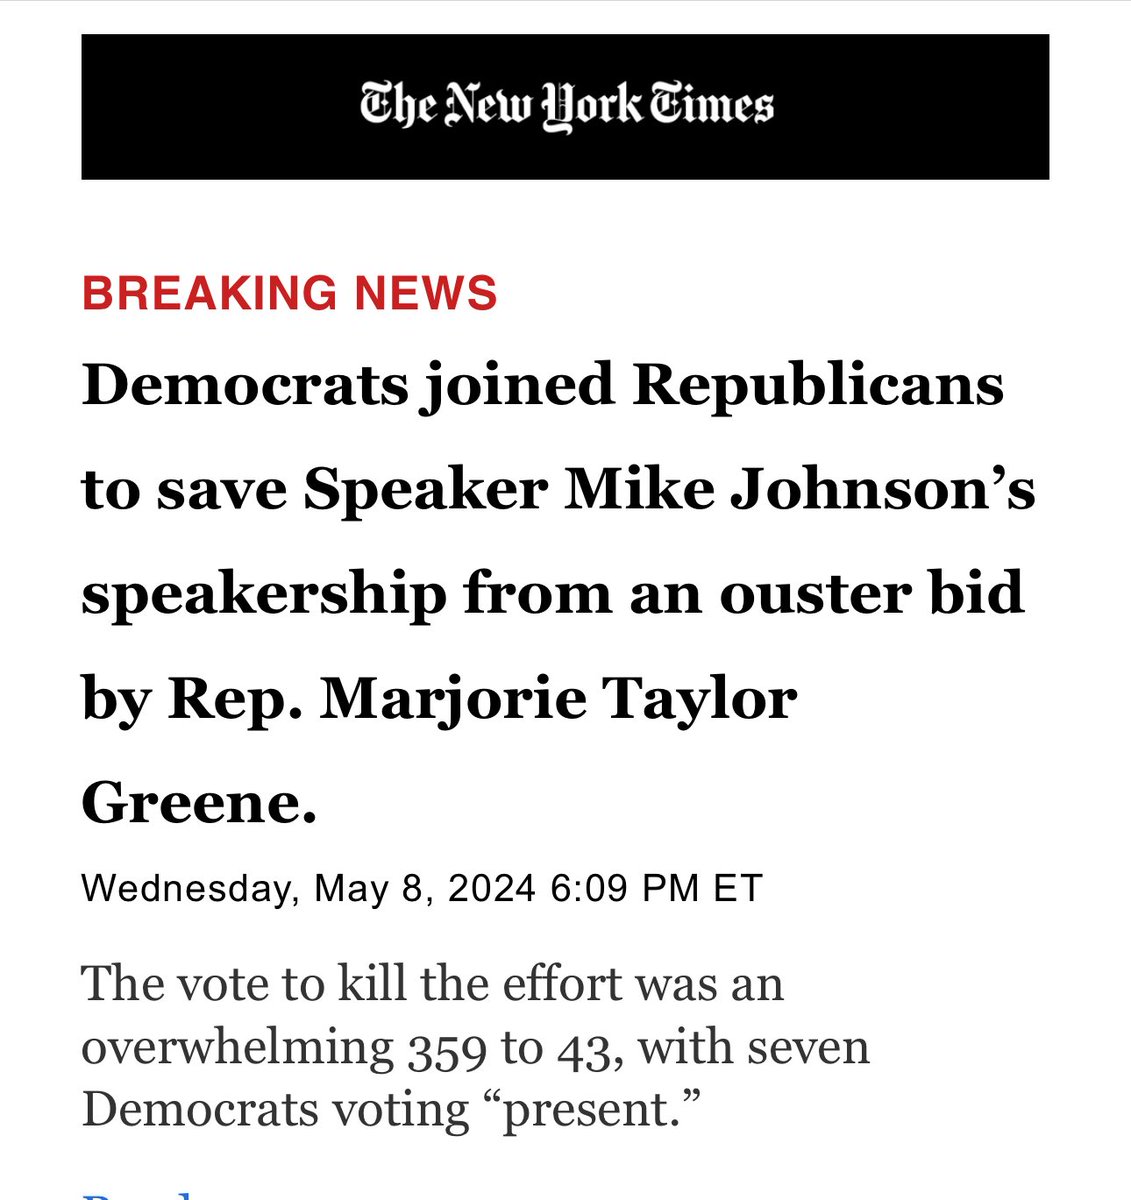 Democrats will live to regret saving Mike Johnson because he’s a weirdo nuts and phony.... but for now he’s not quite as weird nuts or brainless as Marjorie Taylor Greene